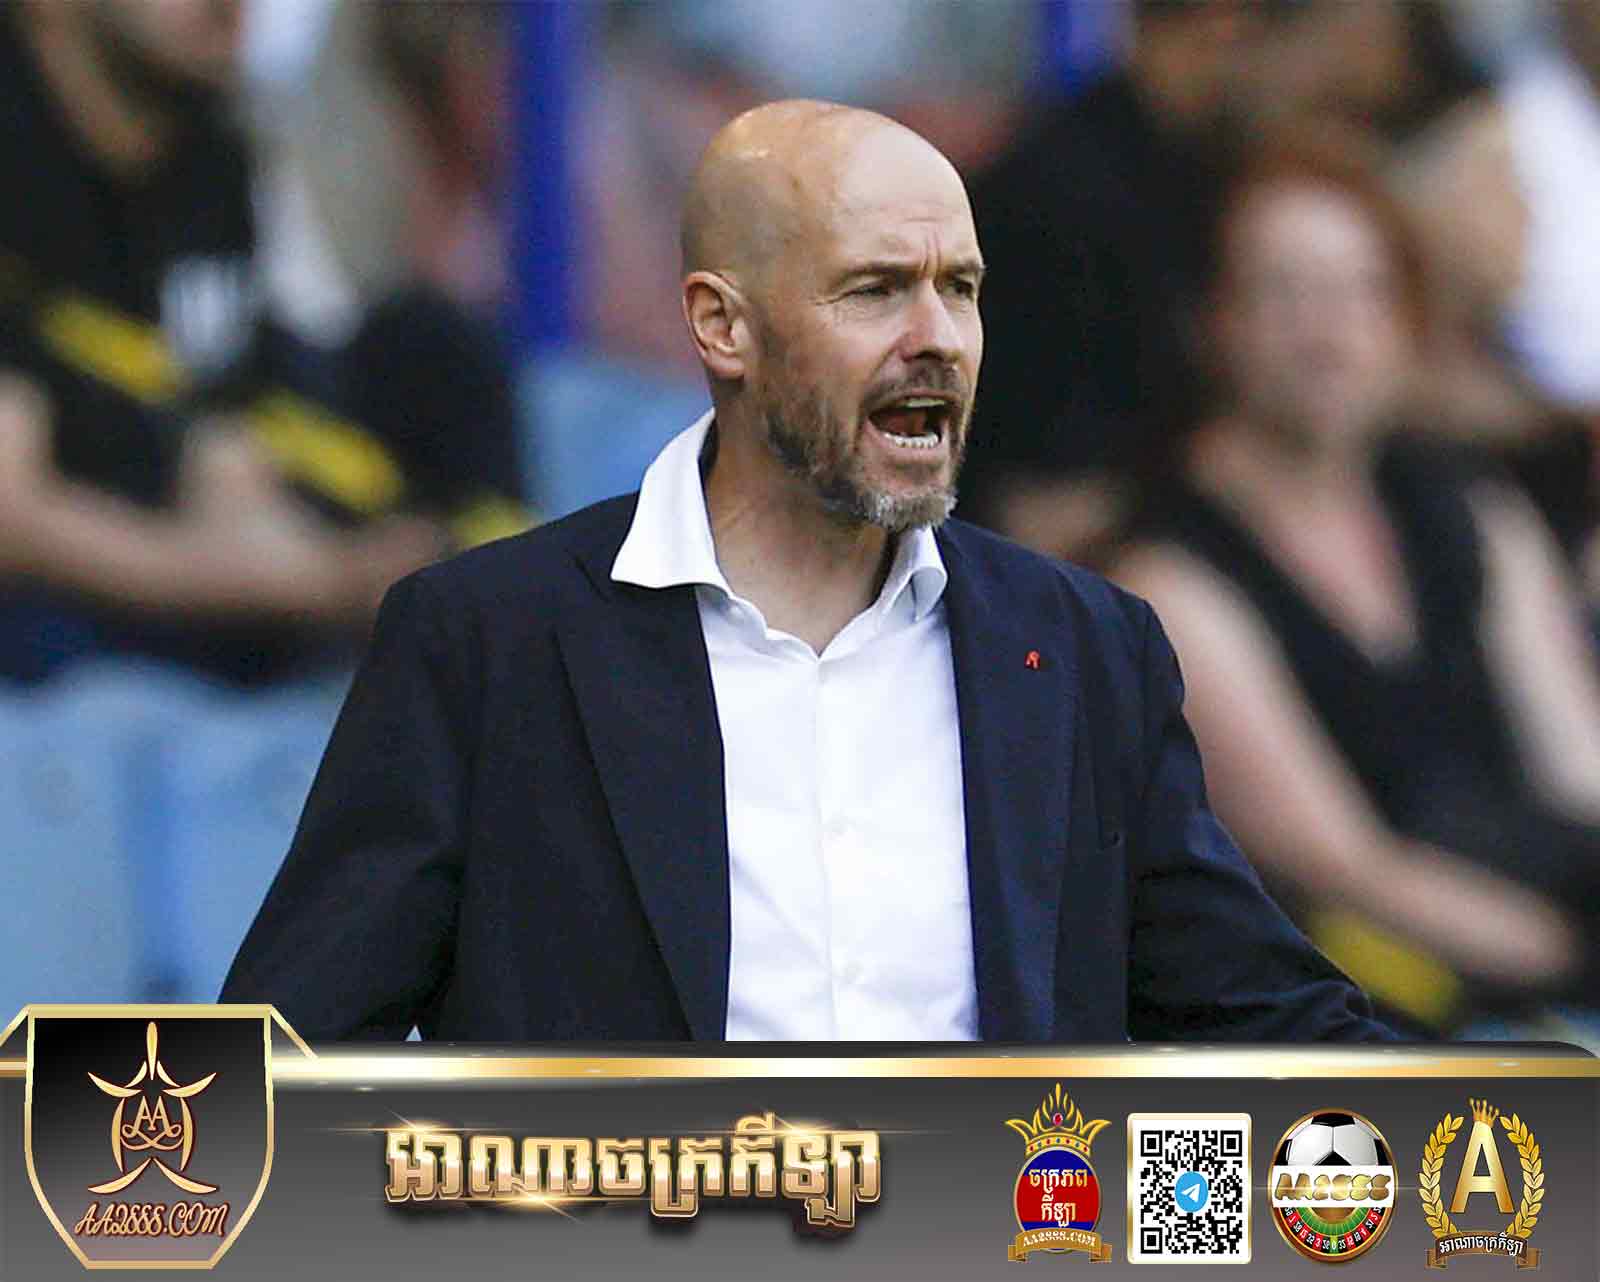 Ten hag address that Ronaldo continue to stay at Manutd 